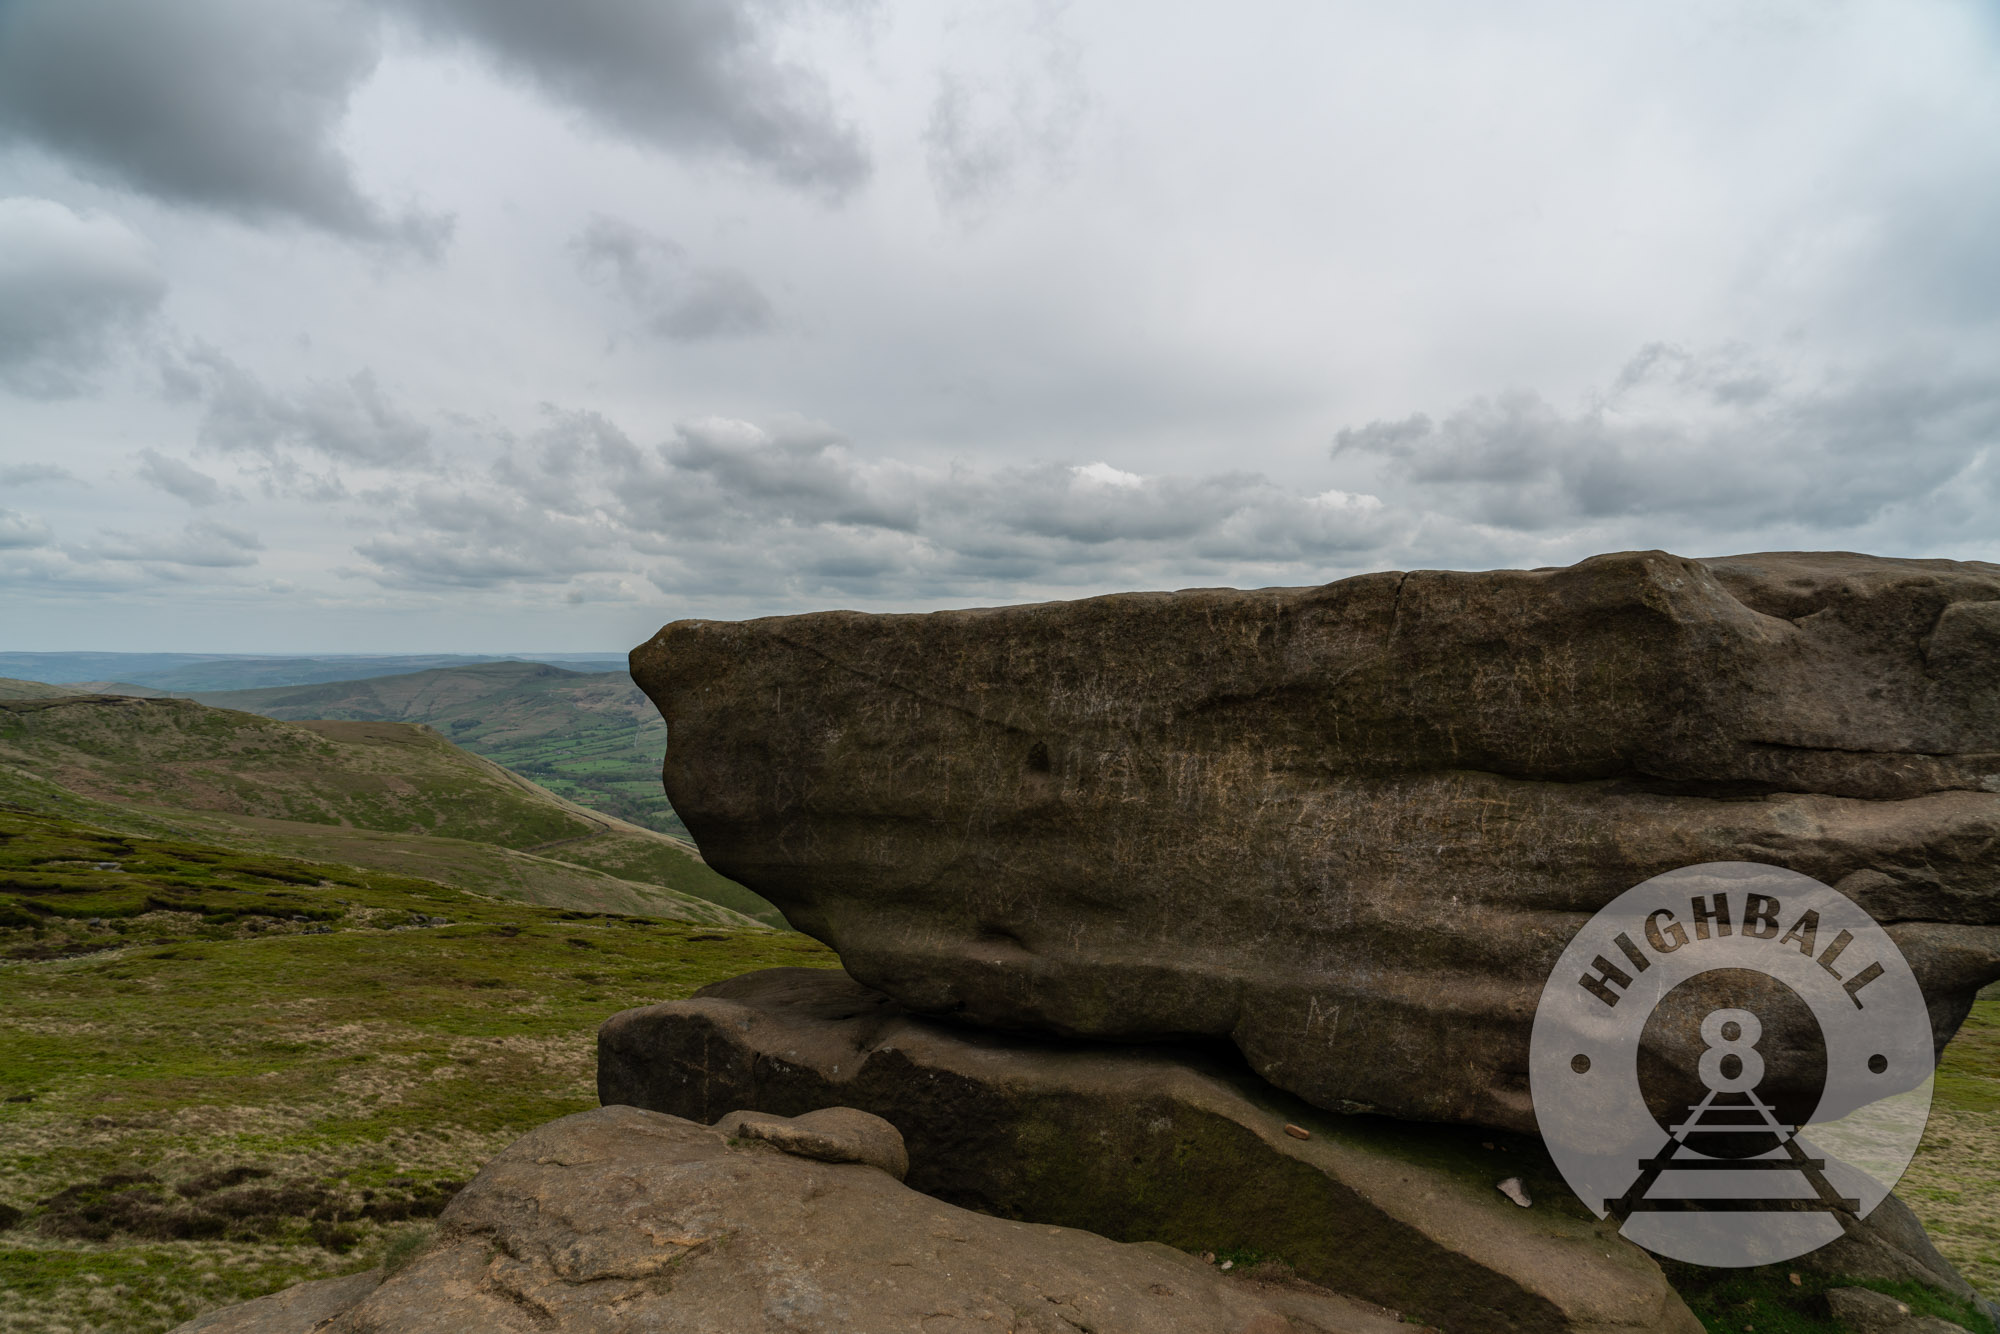 Noe's Stool, looking south over the Vale of Edale from the southeast corner of Kinder Scout, Peak District, Derbyshire, England, UK, 2018.